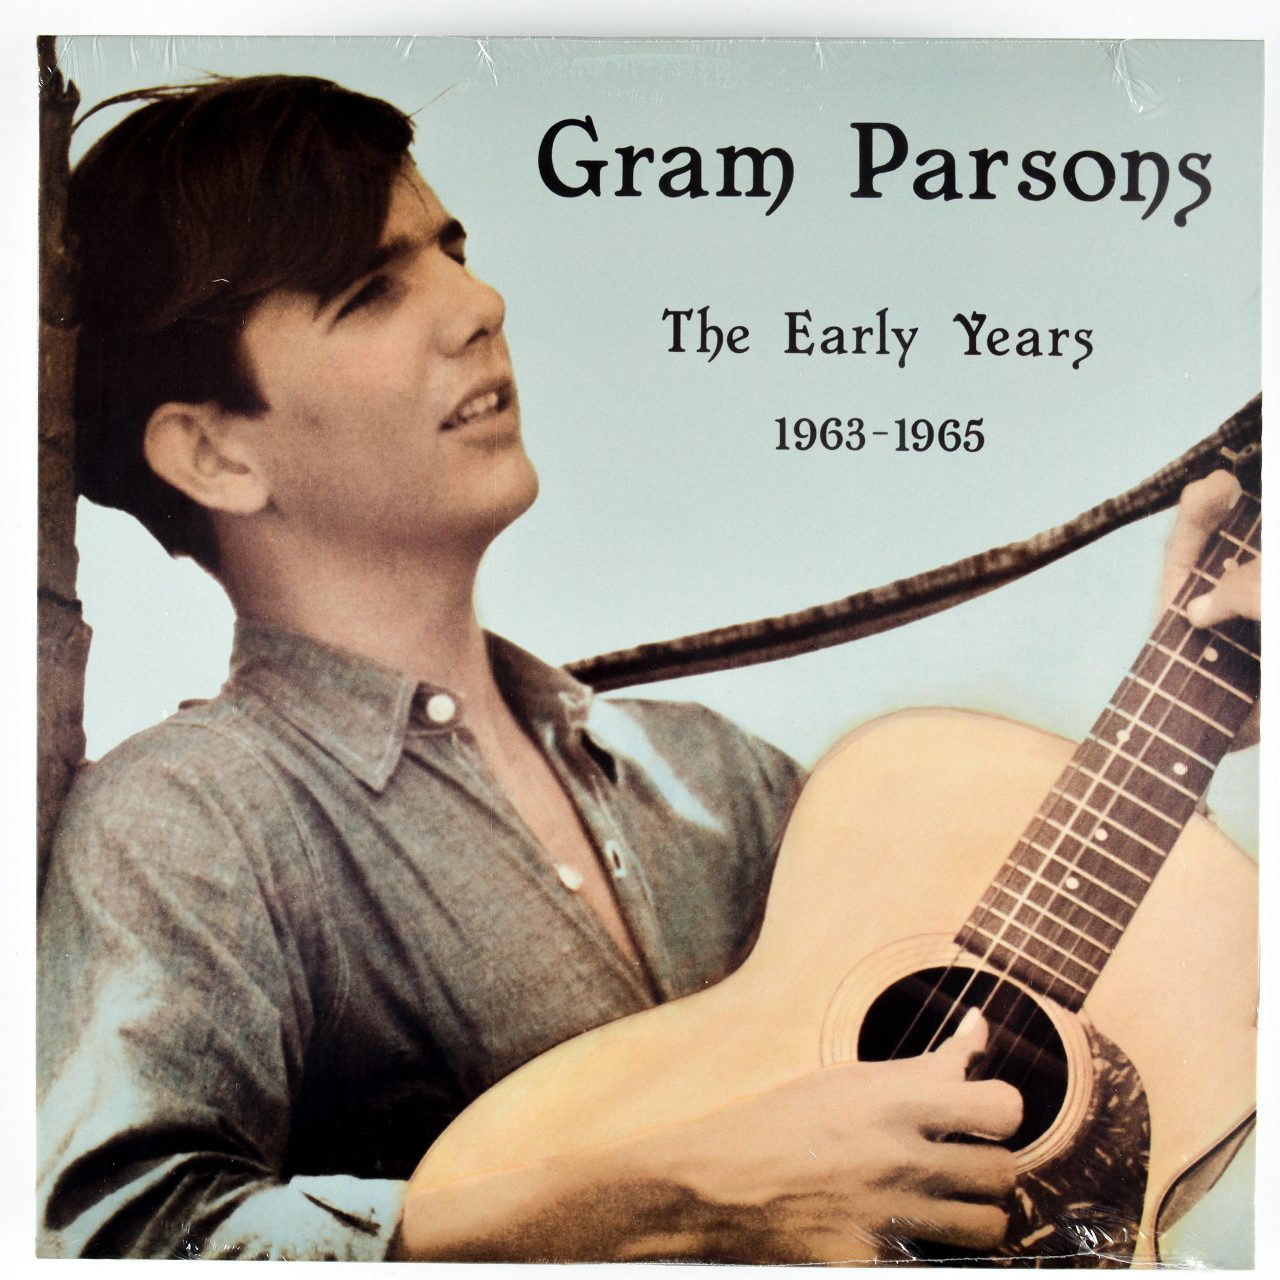 Gram Parsons – The Early Years 1963-1965 cover album